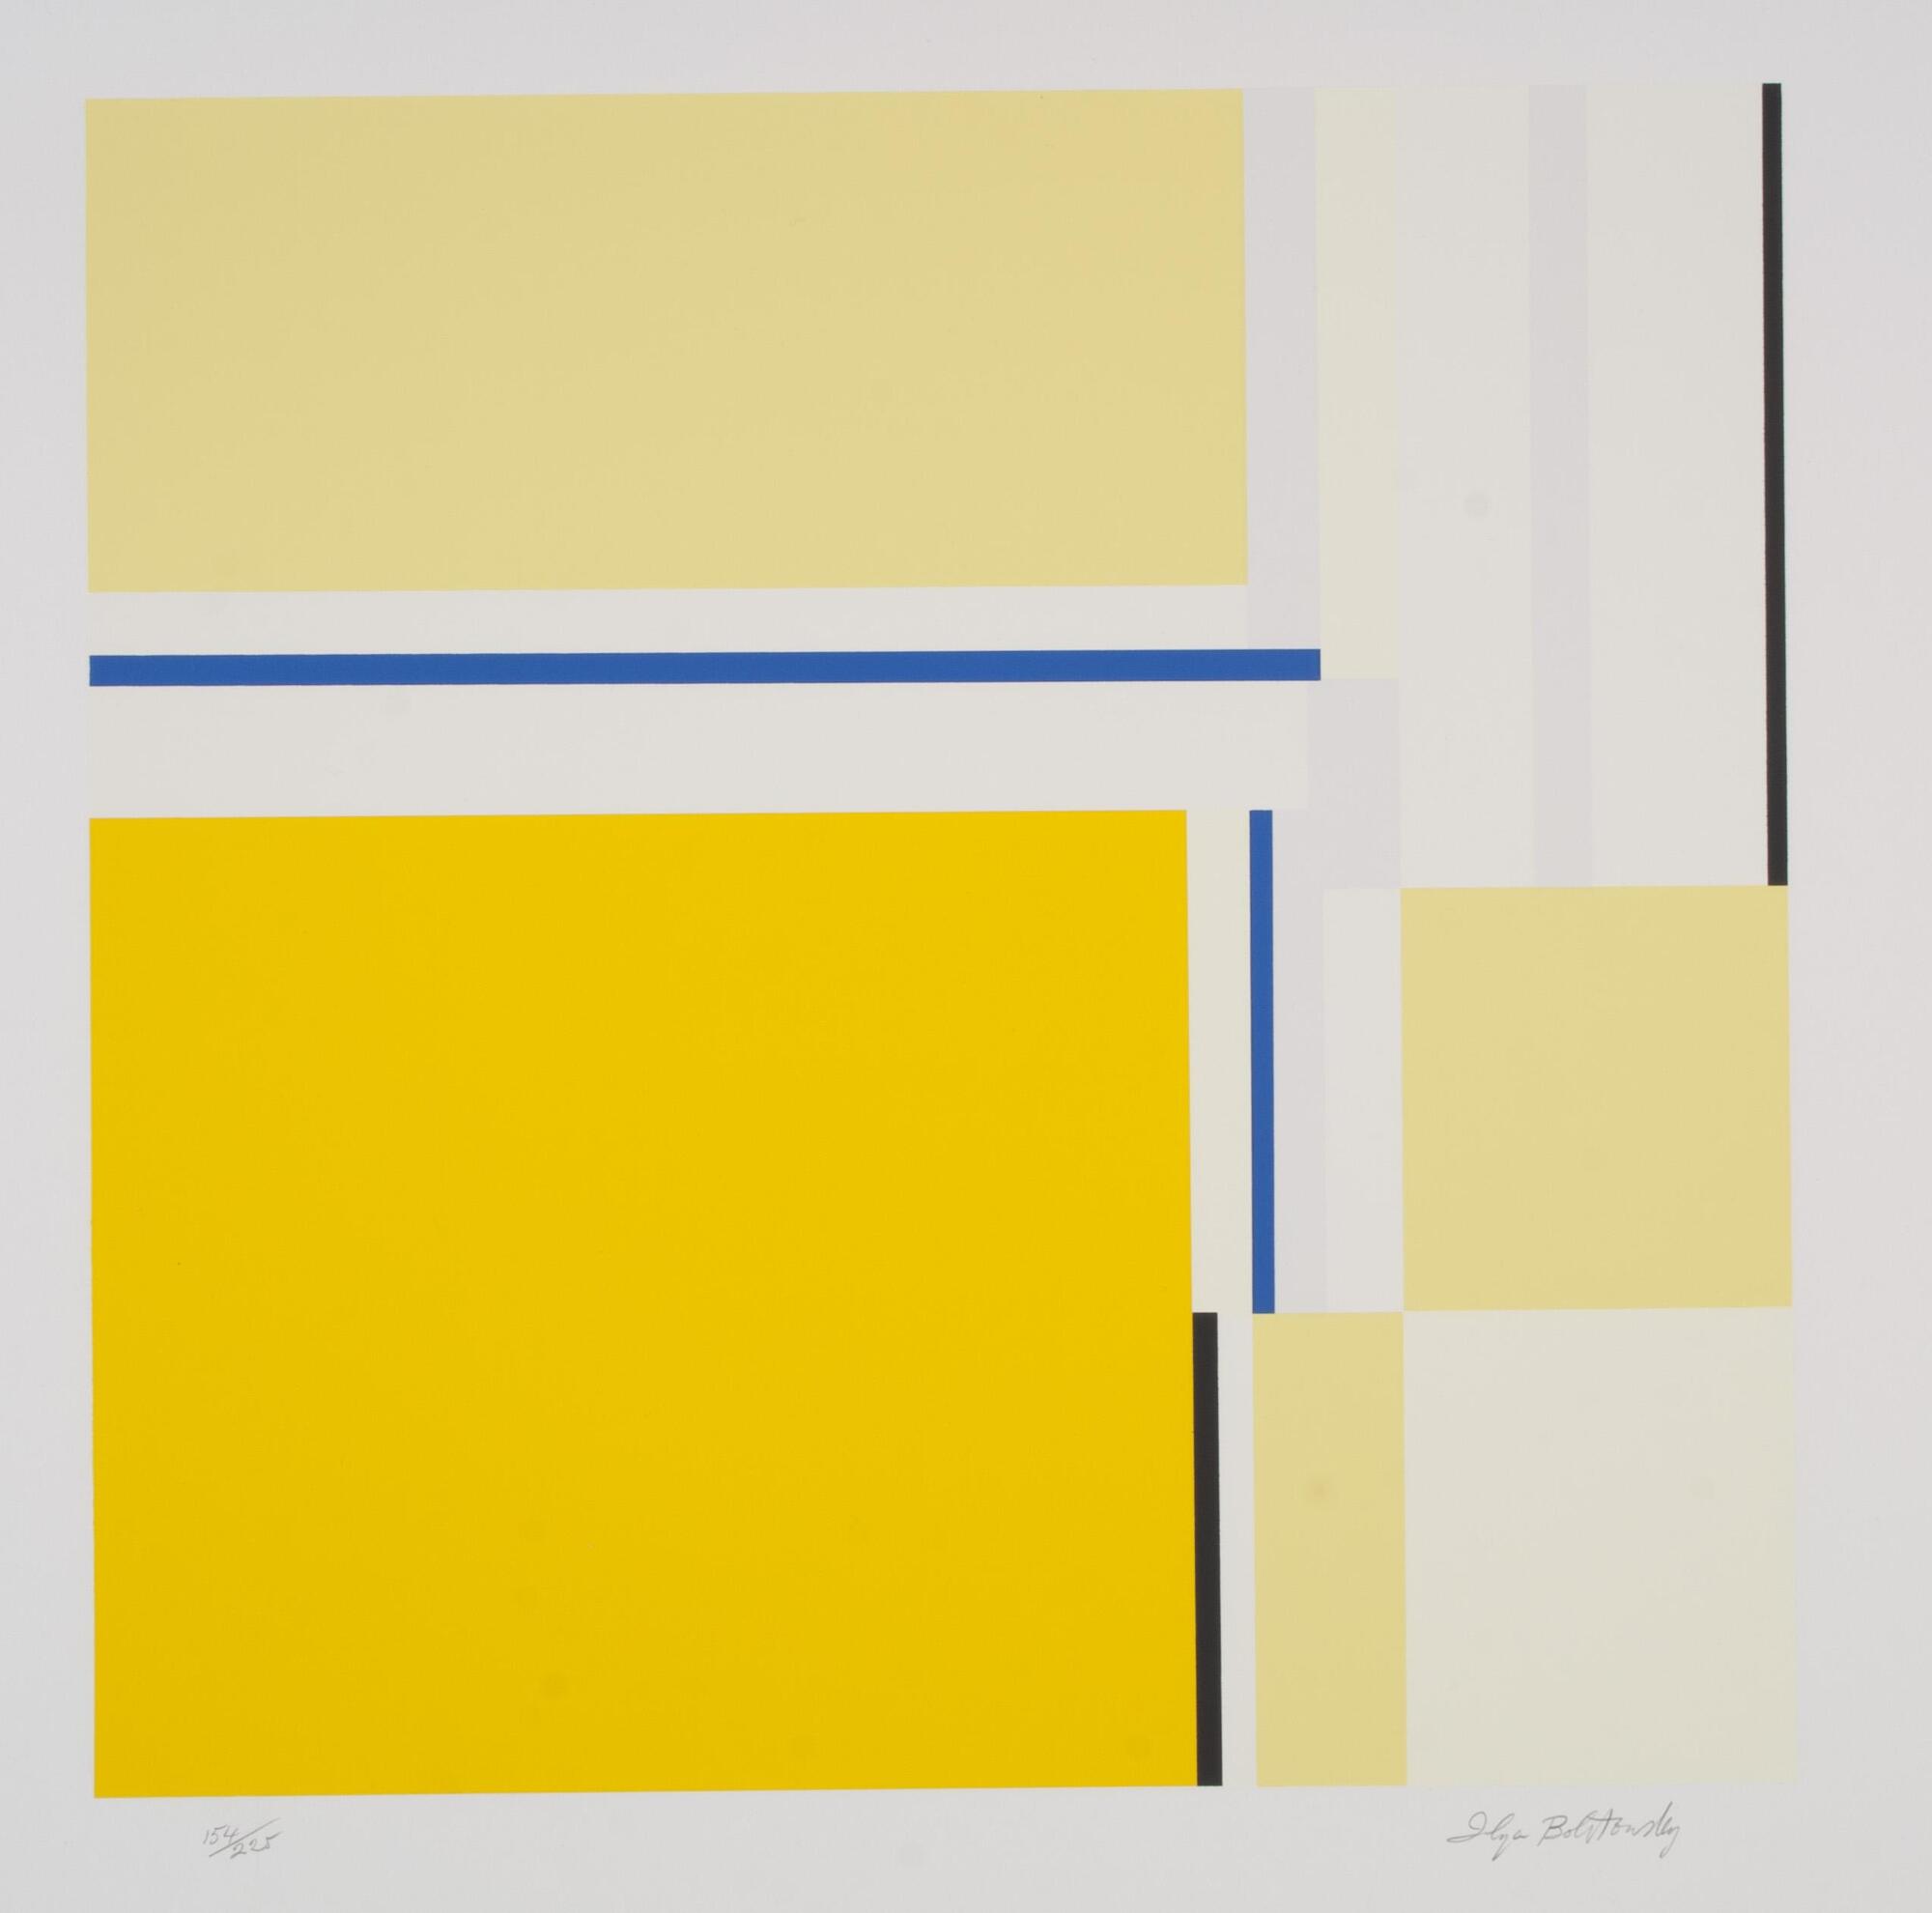 This screenprint has a number of large rectangular shapes spread throughout the whole composition: a large dark yellow square in lower left quadrant, a lighter yellow square and rectangles along top and lower right quadrant, and blue, black and white vertical and horizontal lines between the yellow components.